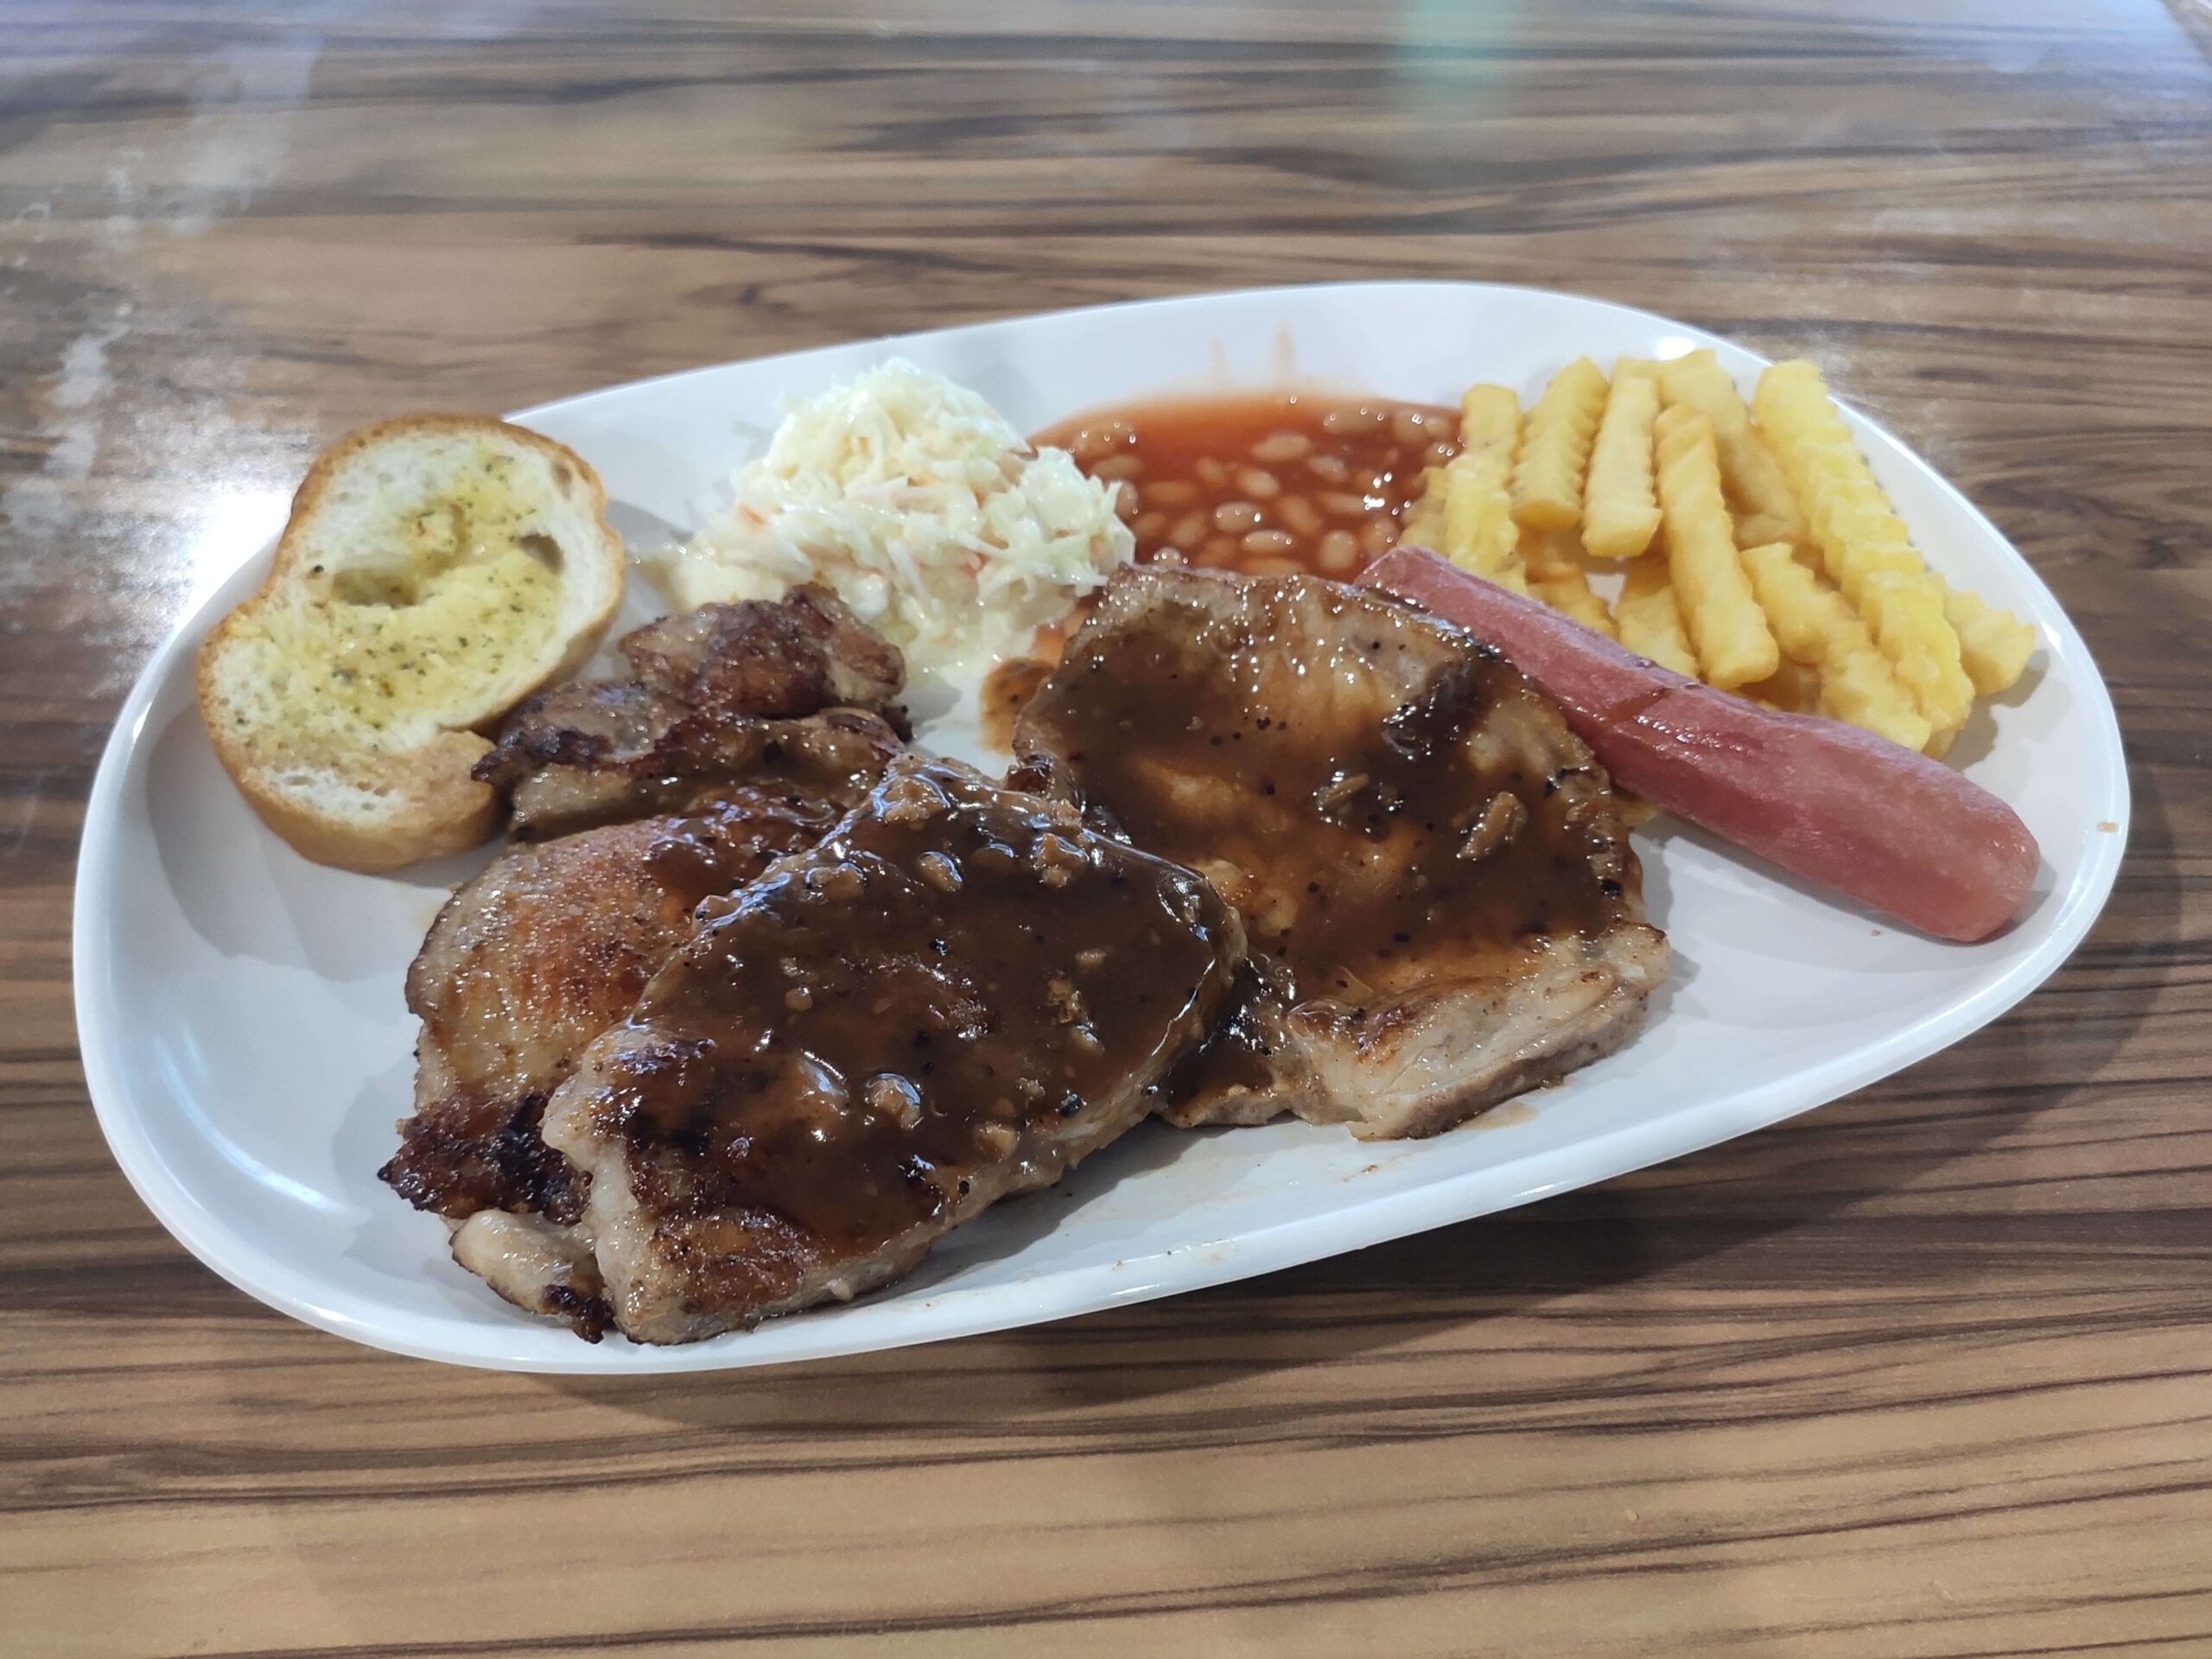 Oikos Western Delight: Mixed Grill